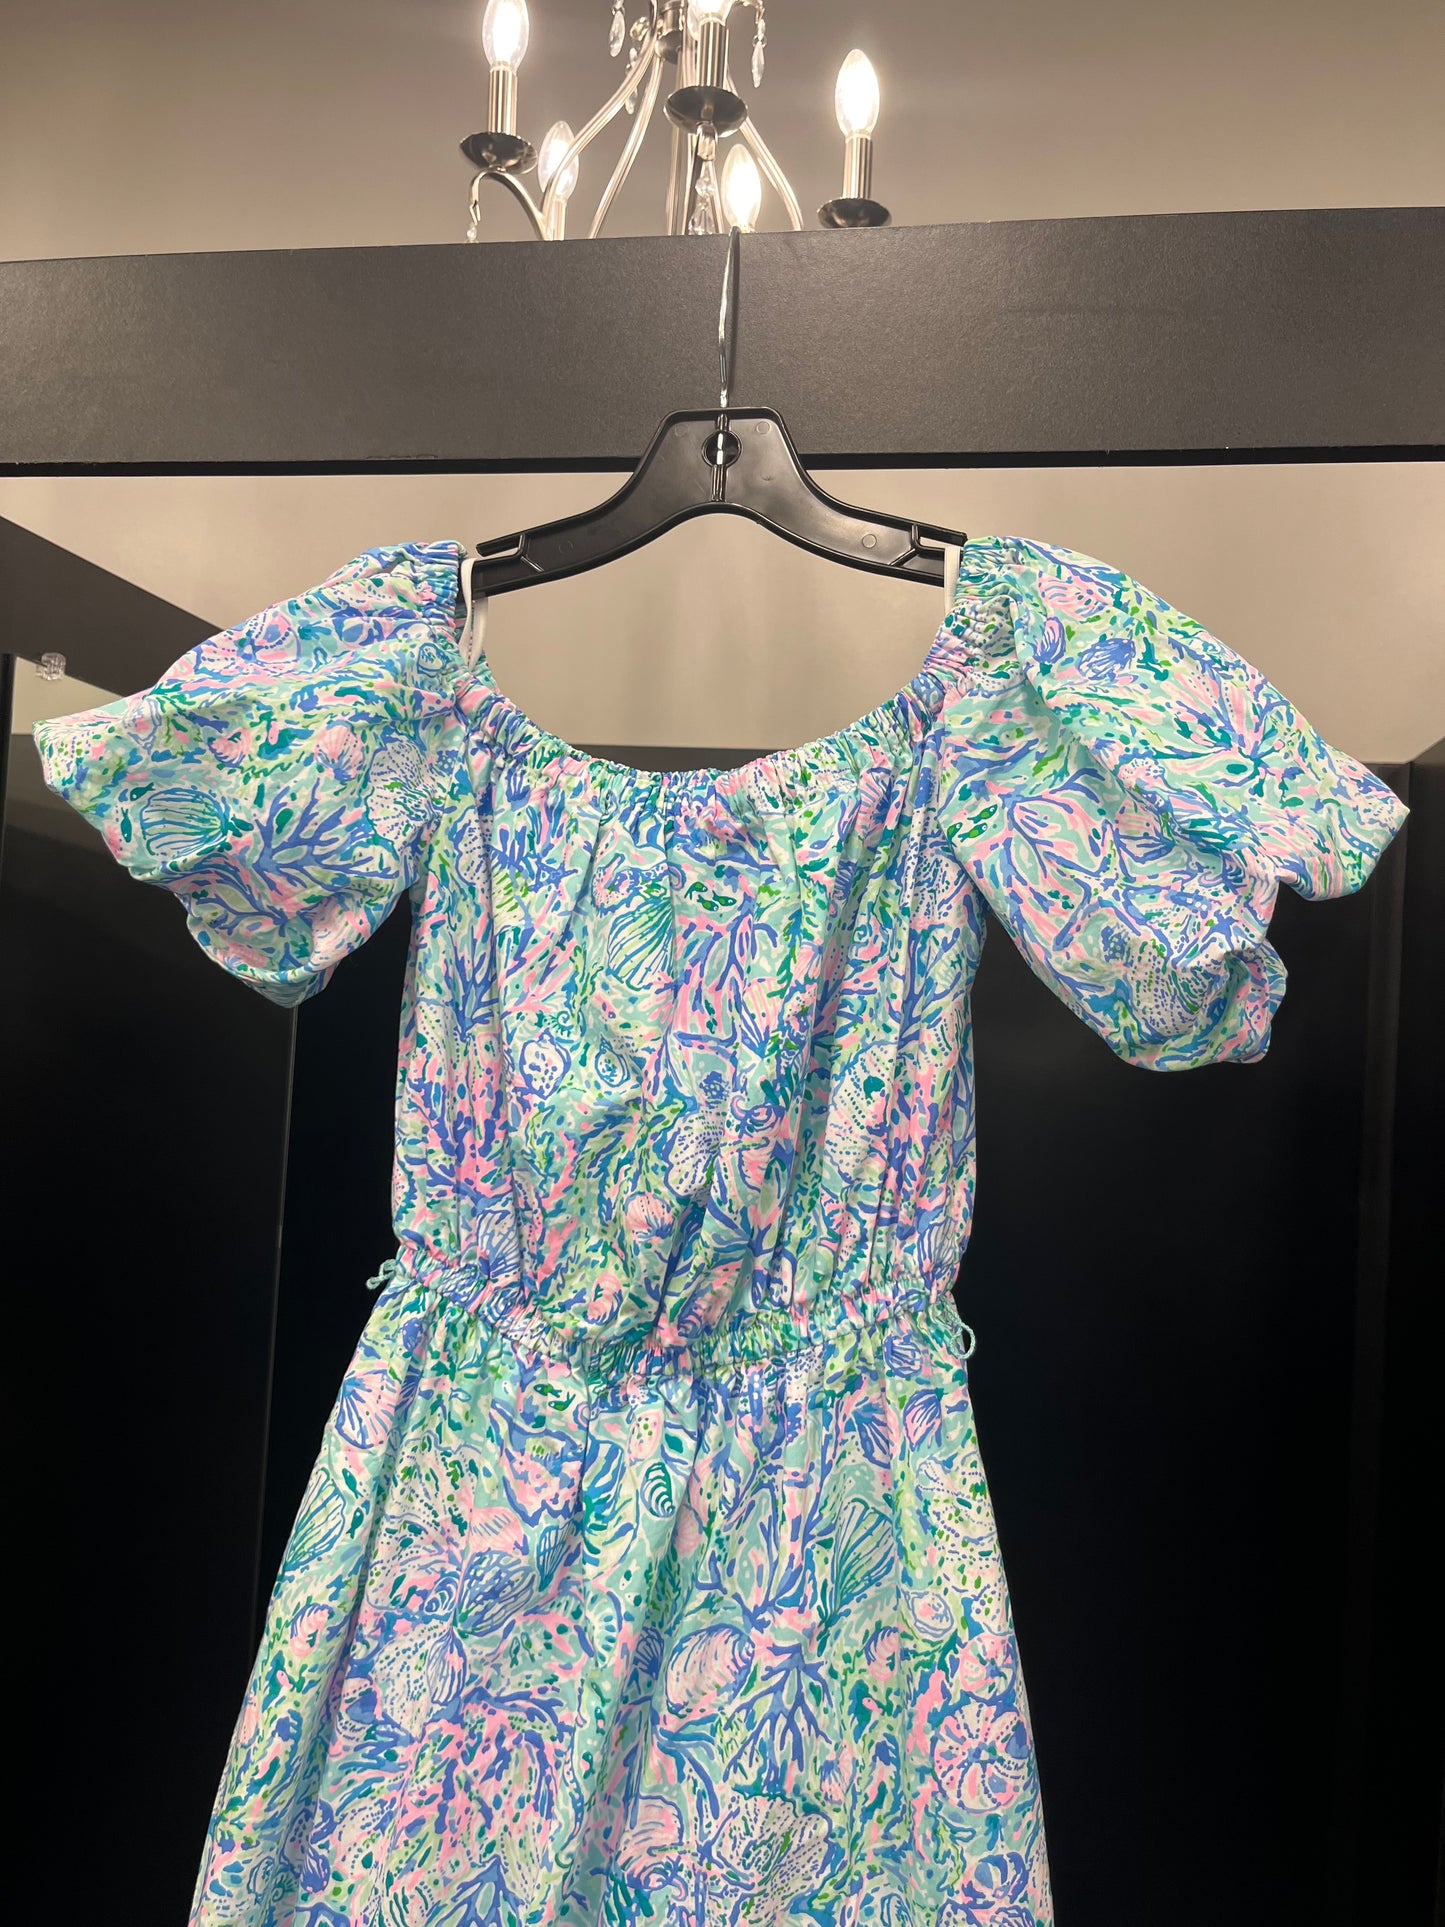 Multi-colored Dress Casual Maxi Lilly Pulitzer, Size Xs